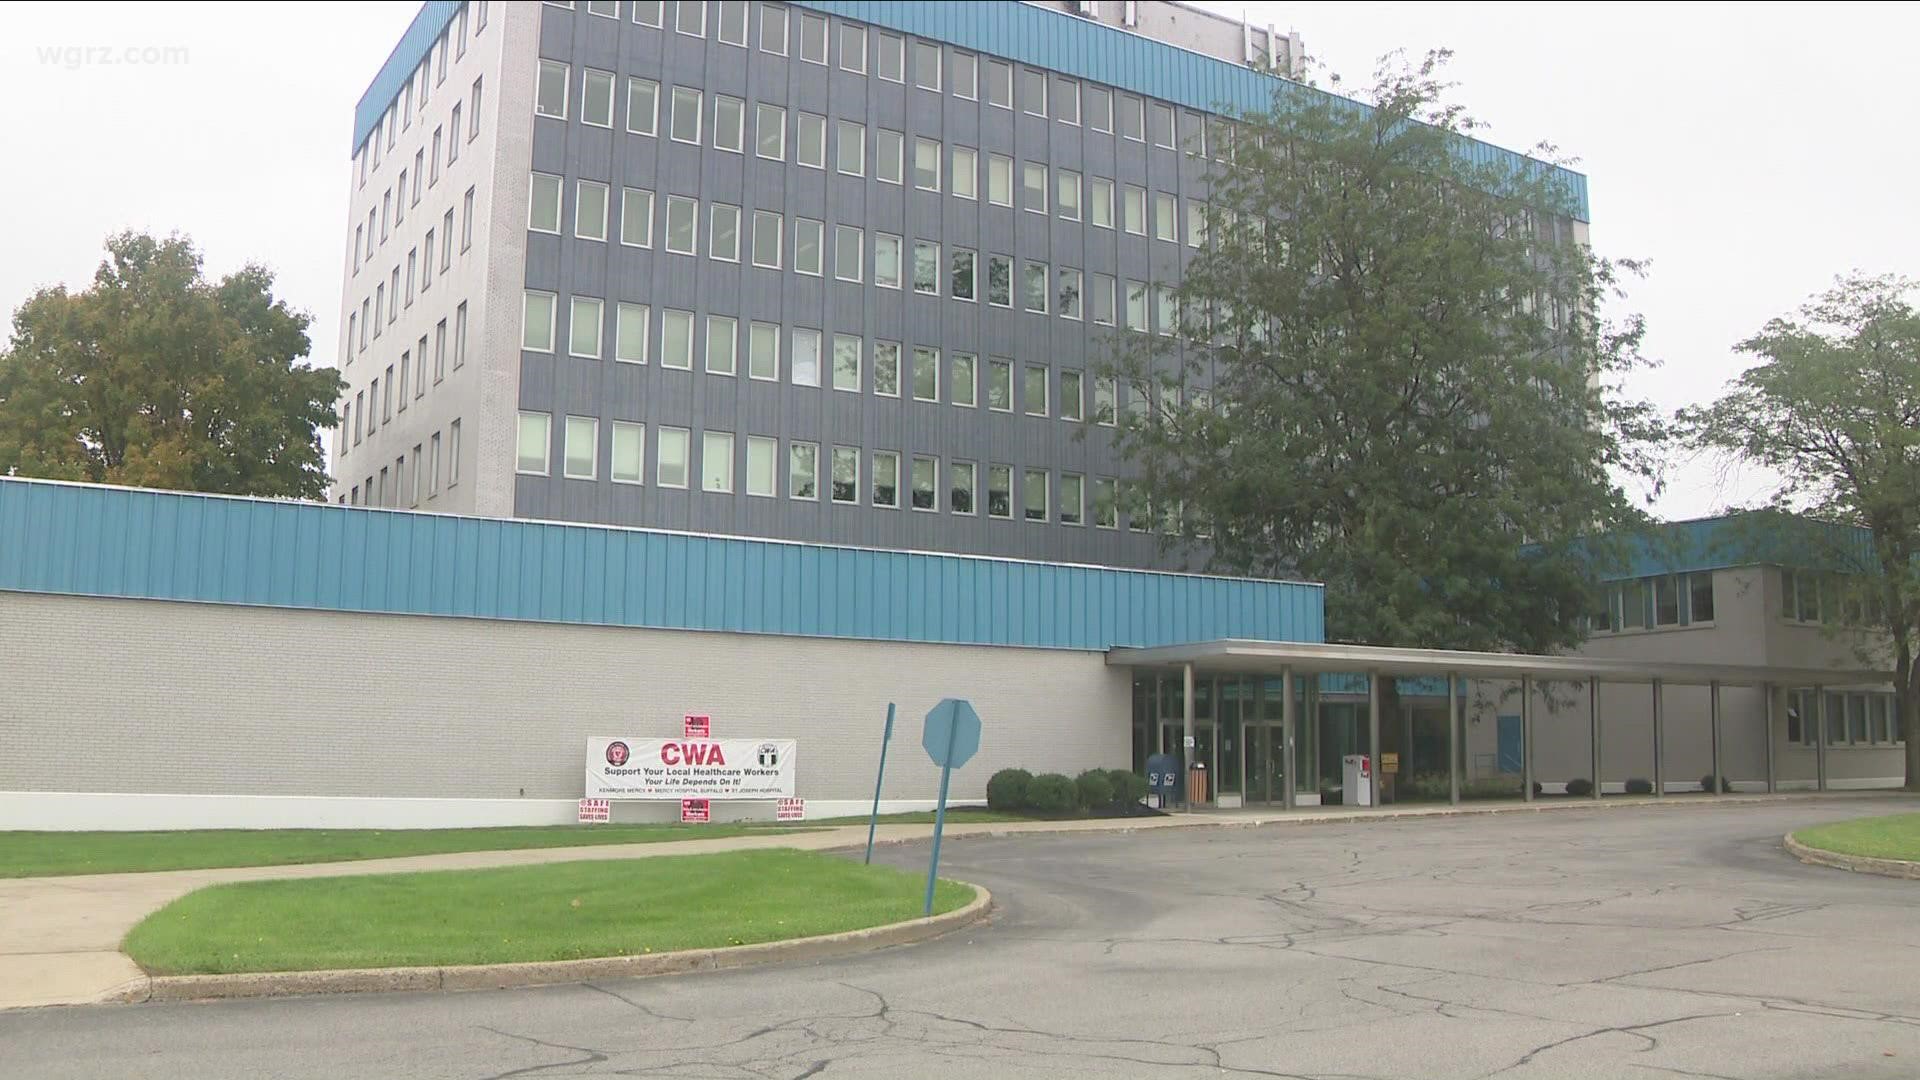 Representatives of the union and catholic health sat down for face to face discussions for the first time since talks broke off late last Thursday.